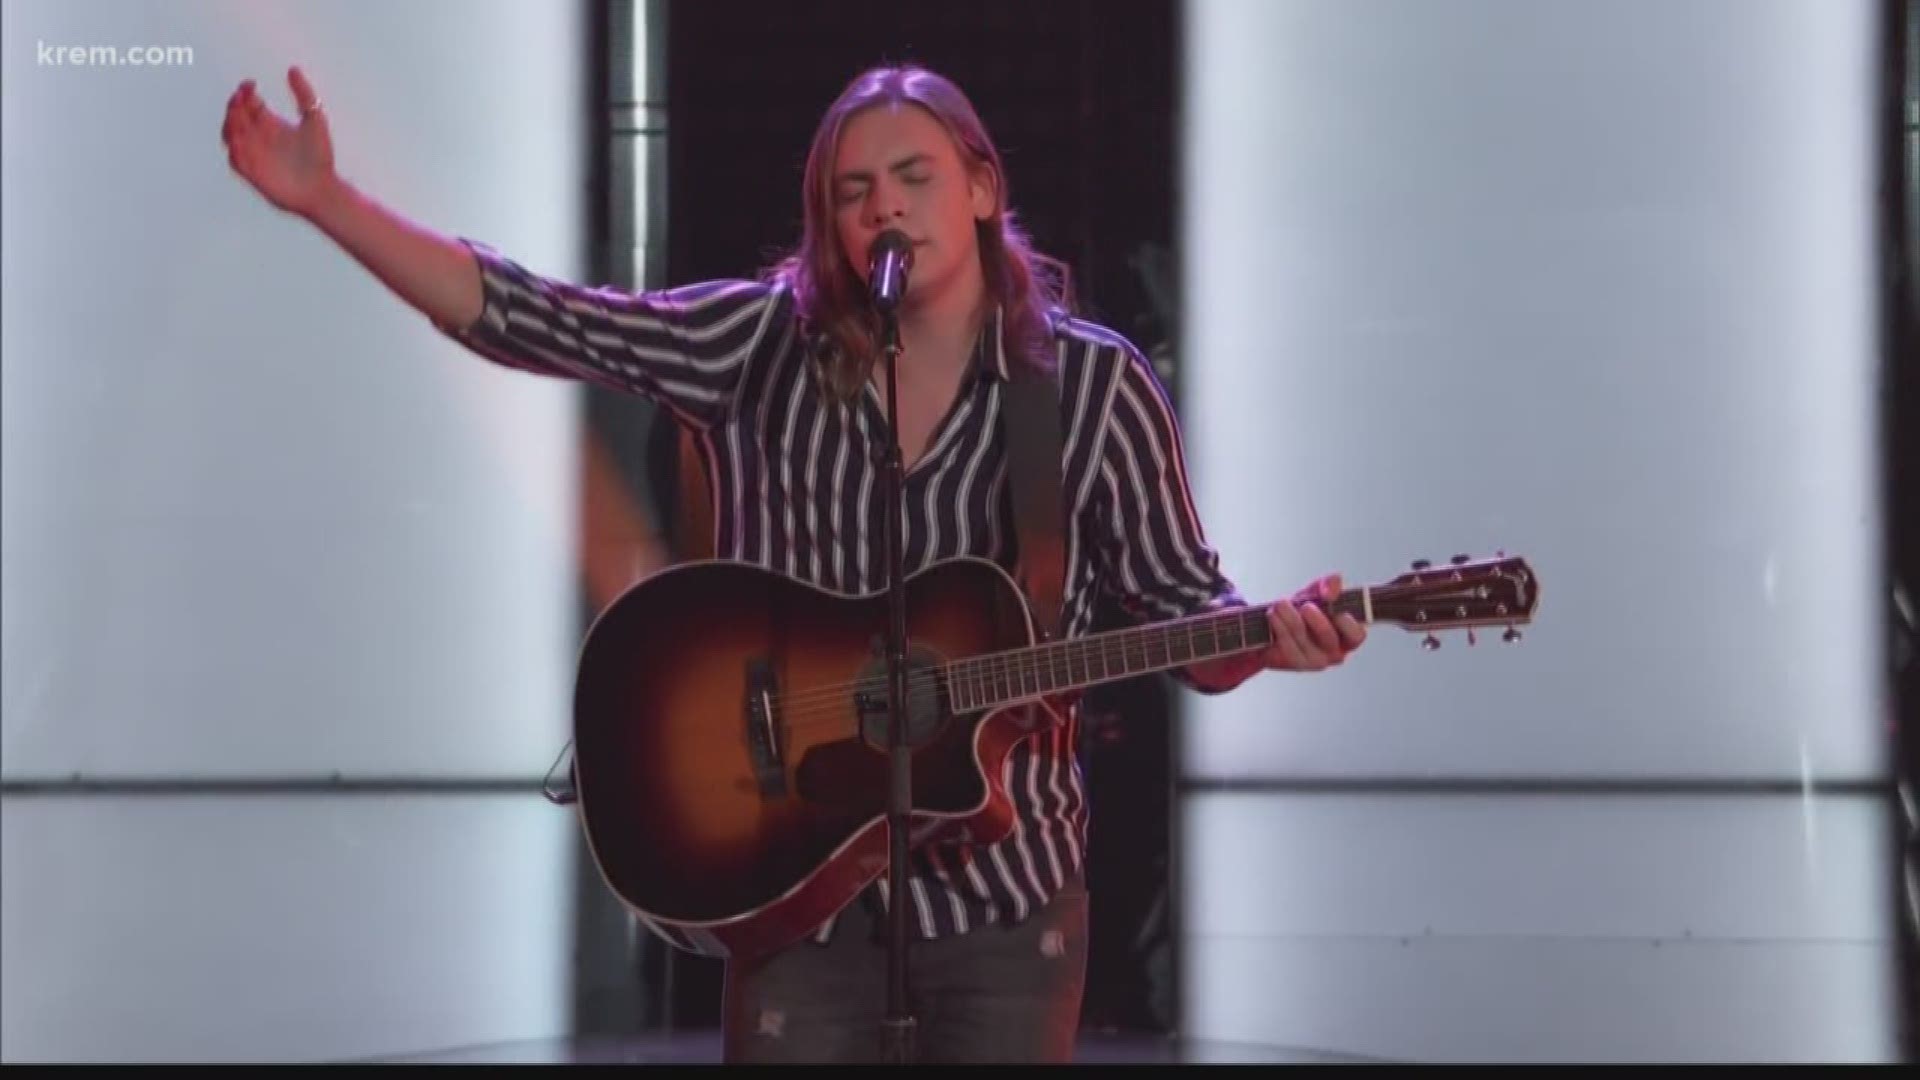 Jacob Maxwell from Coeur d'Alene turned the chairs of John Legend and Kelly Clarkson during blind auditions on singing show "The Voice."